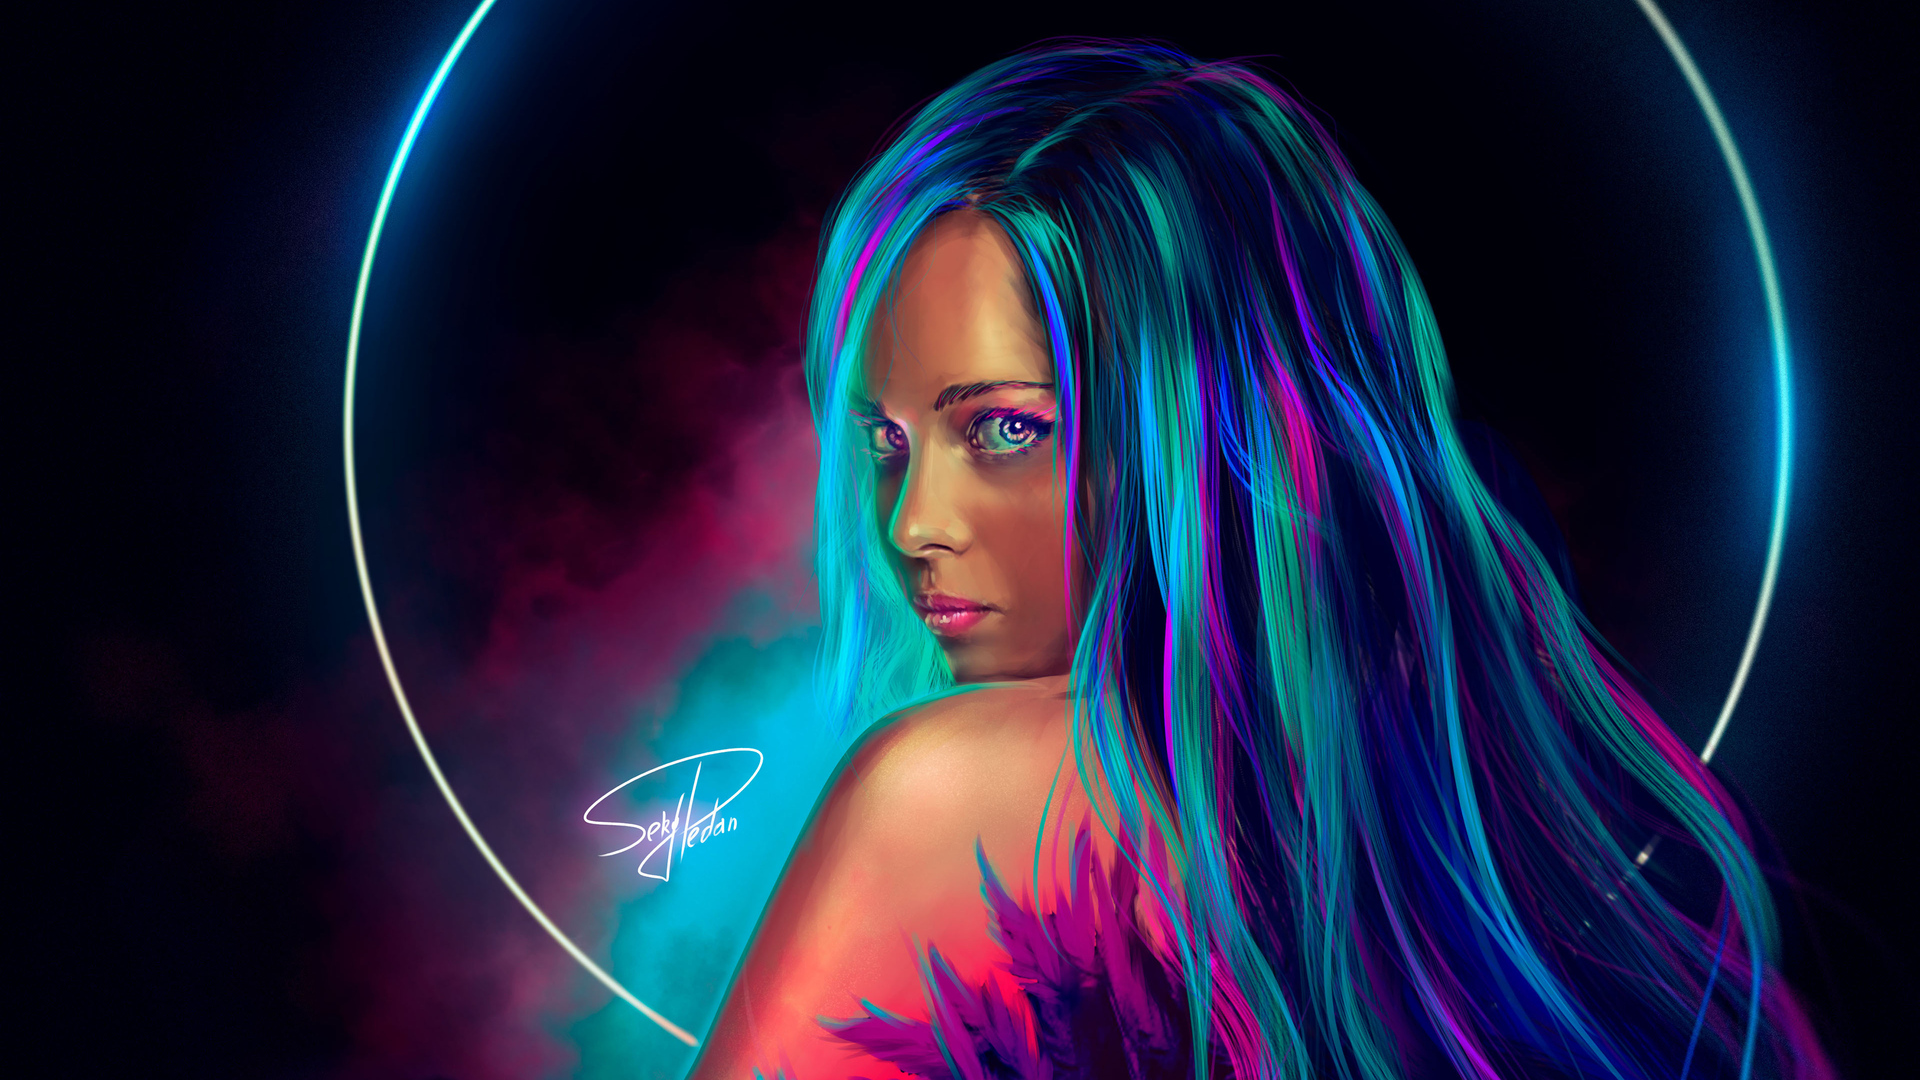 A digital painting of a woman with long hair and a tattoo on her shoulder. - Neon, neon blue